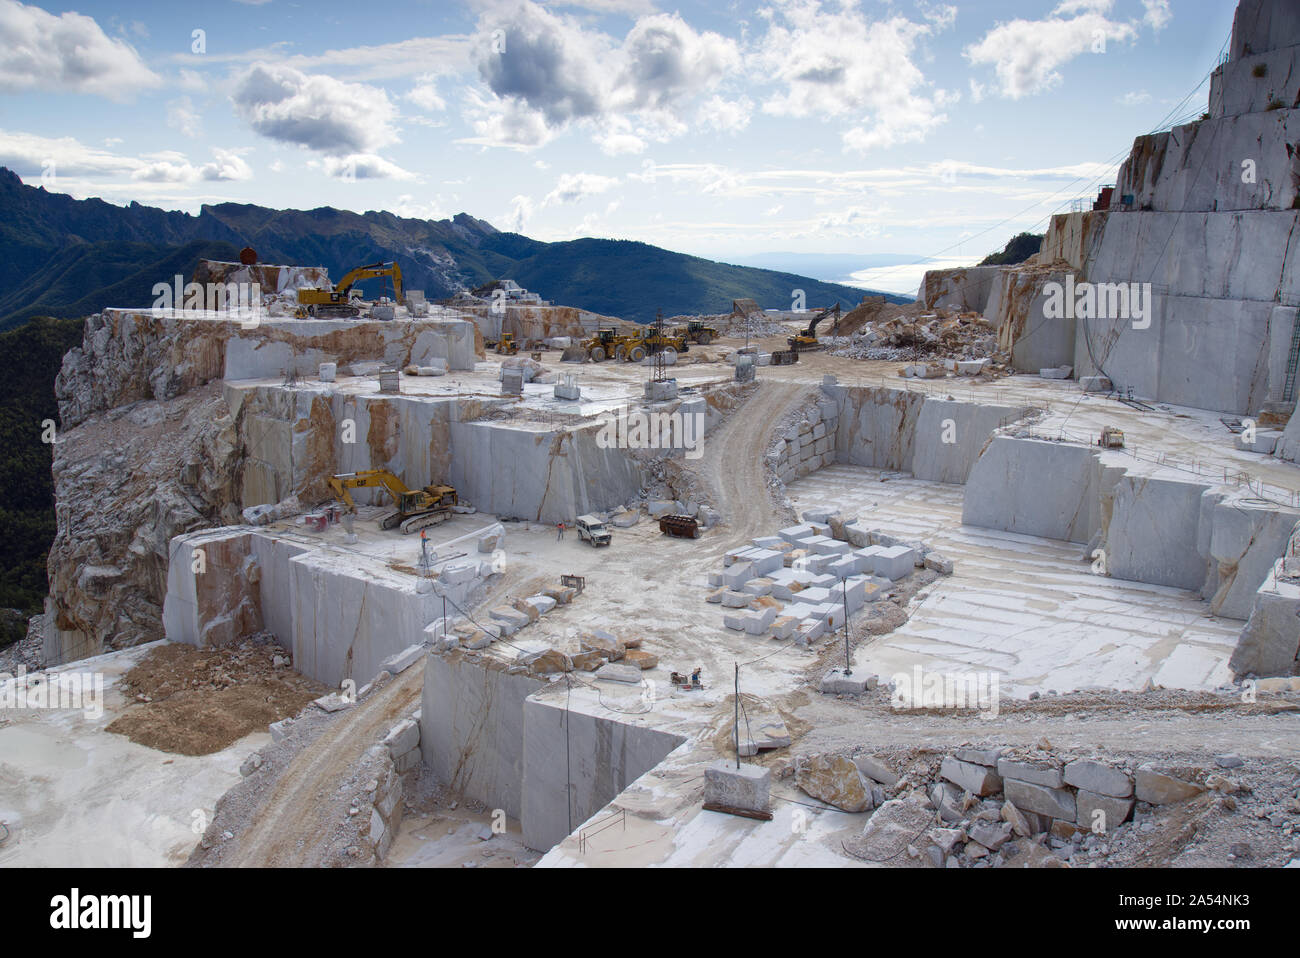 October 7, 2019 - Carrara, Italy: Mining of white marble in the mountains. Italian (Carrara) white marble is a famous building and sculpting material Stock Photo